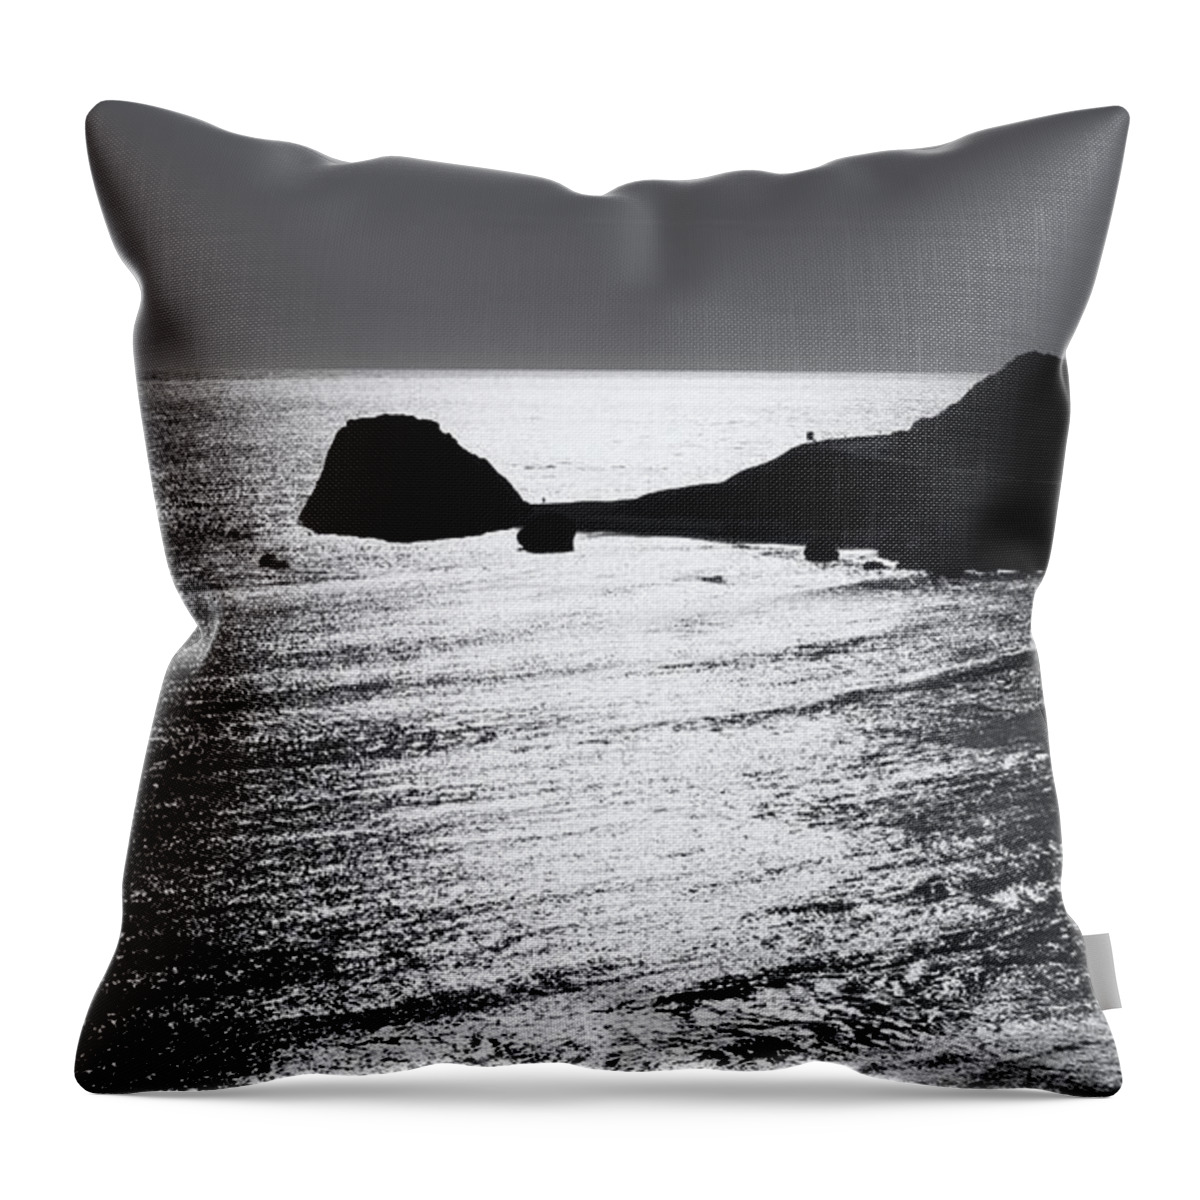 Sea Throw Pillow featuring the photograph Rock Silhouette by Mike Santis